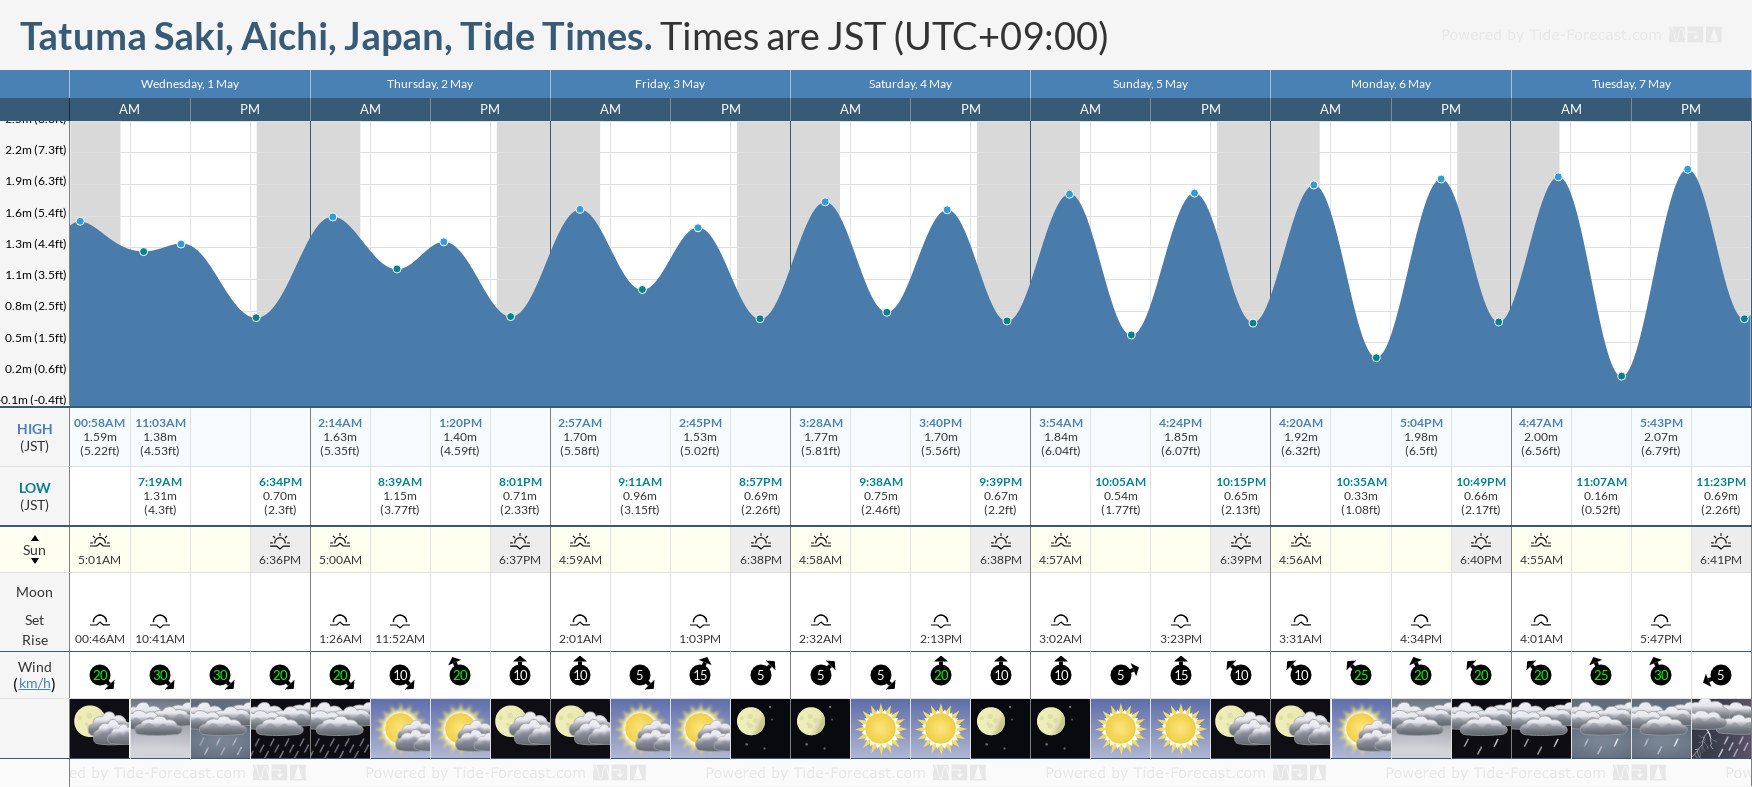 Tatuma Saki, Aichi, Japan Tide Chart including high and low tide tide times for the next 7 days